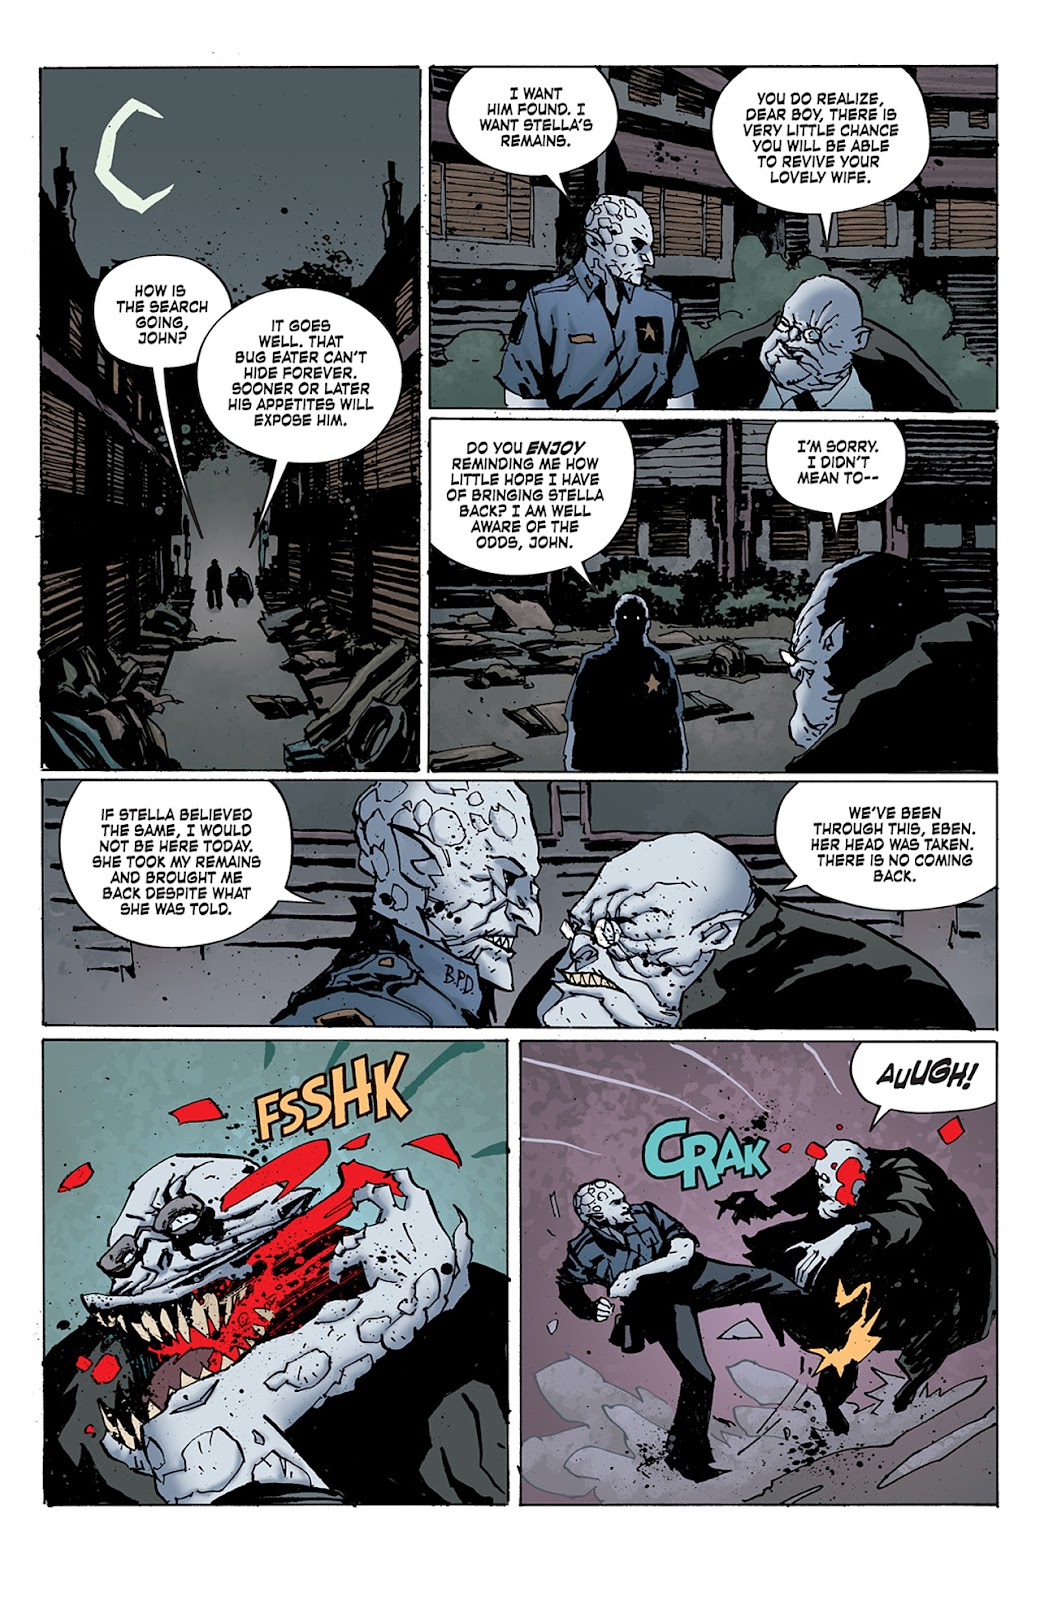 Criminal Macabre: Final Night - The 30 Days of Night Crossover issue 2 - Page 10